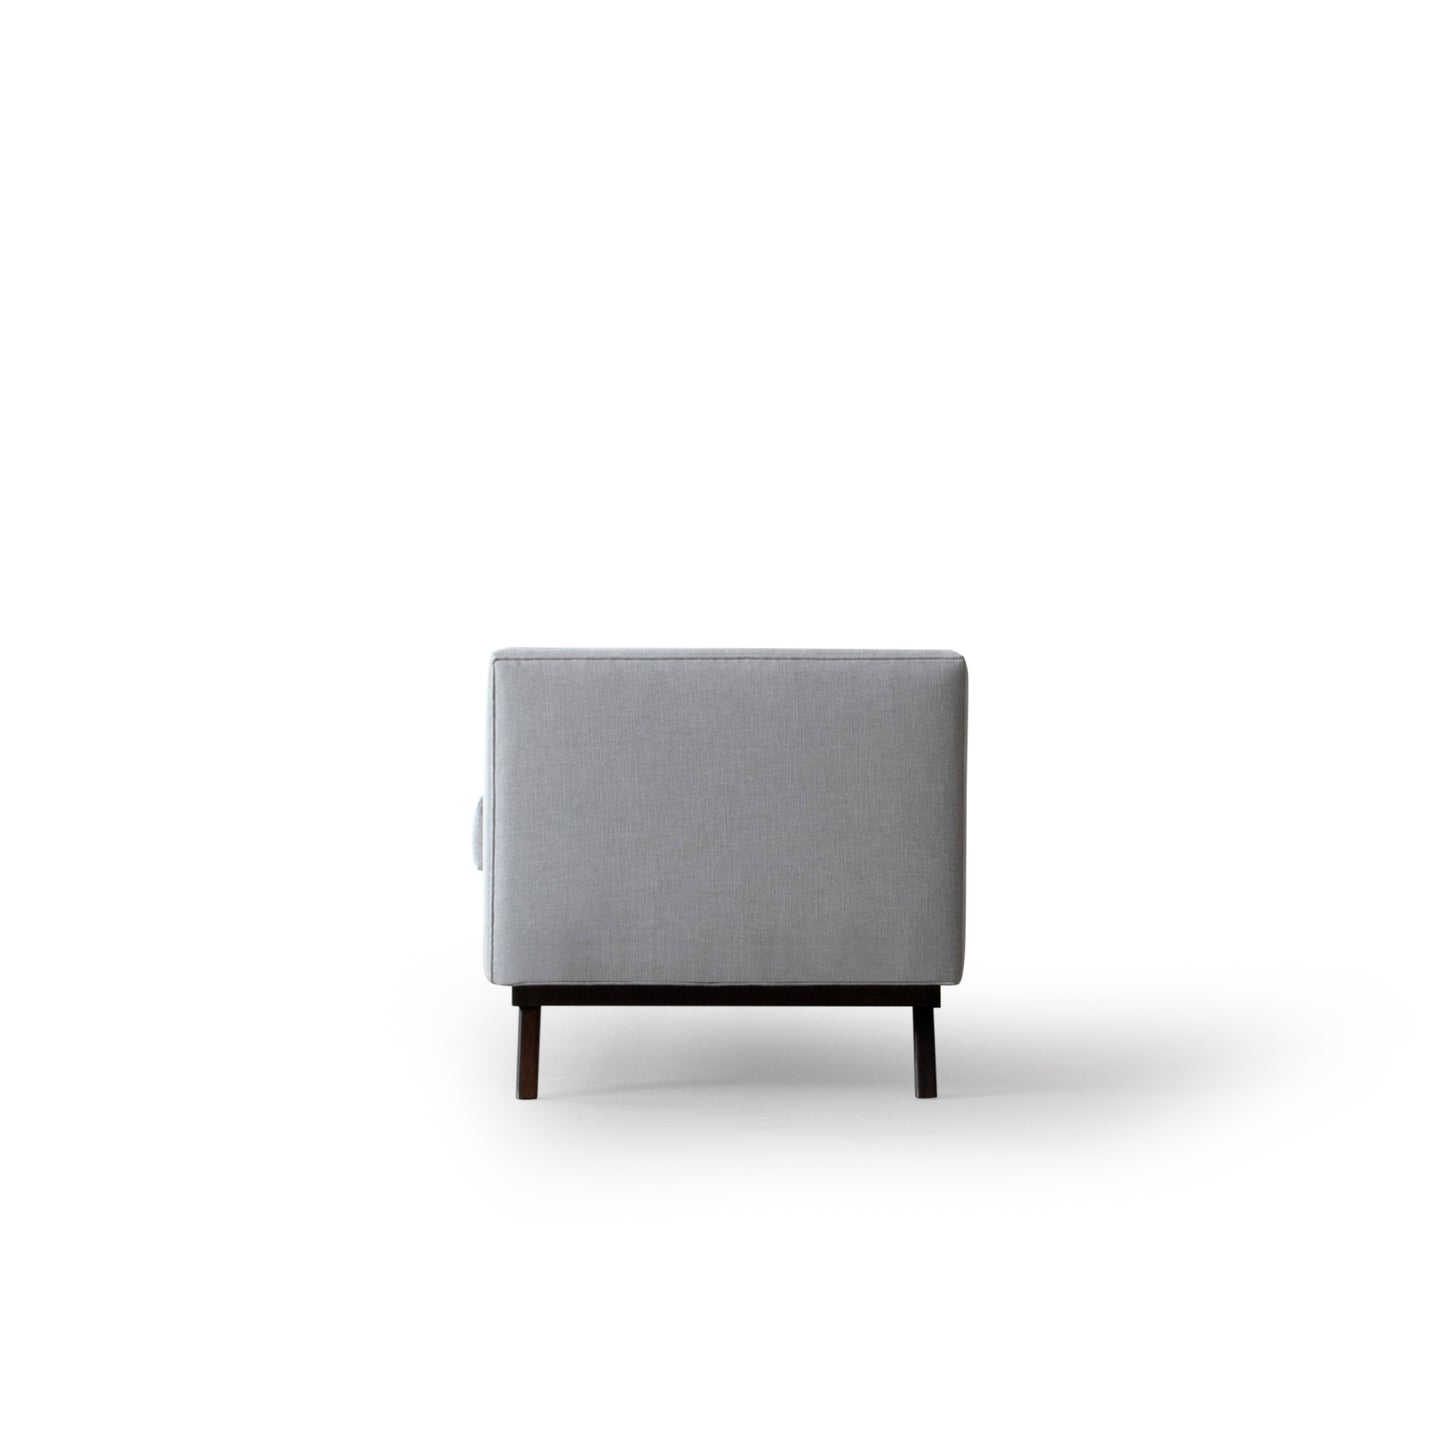 Rollins Sofa Collection